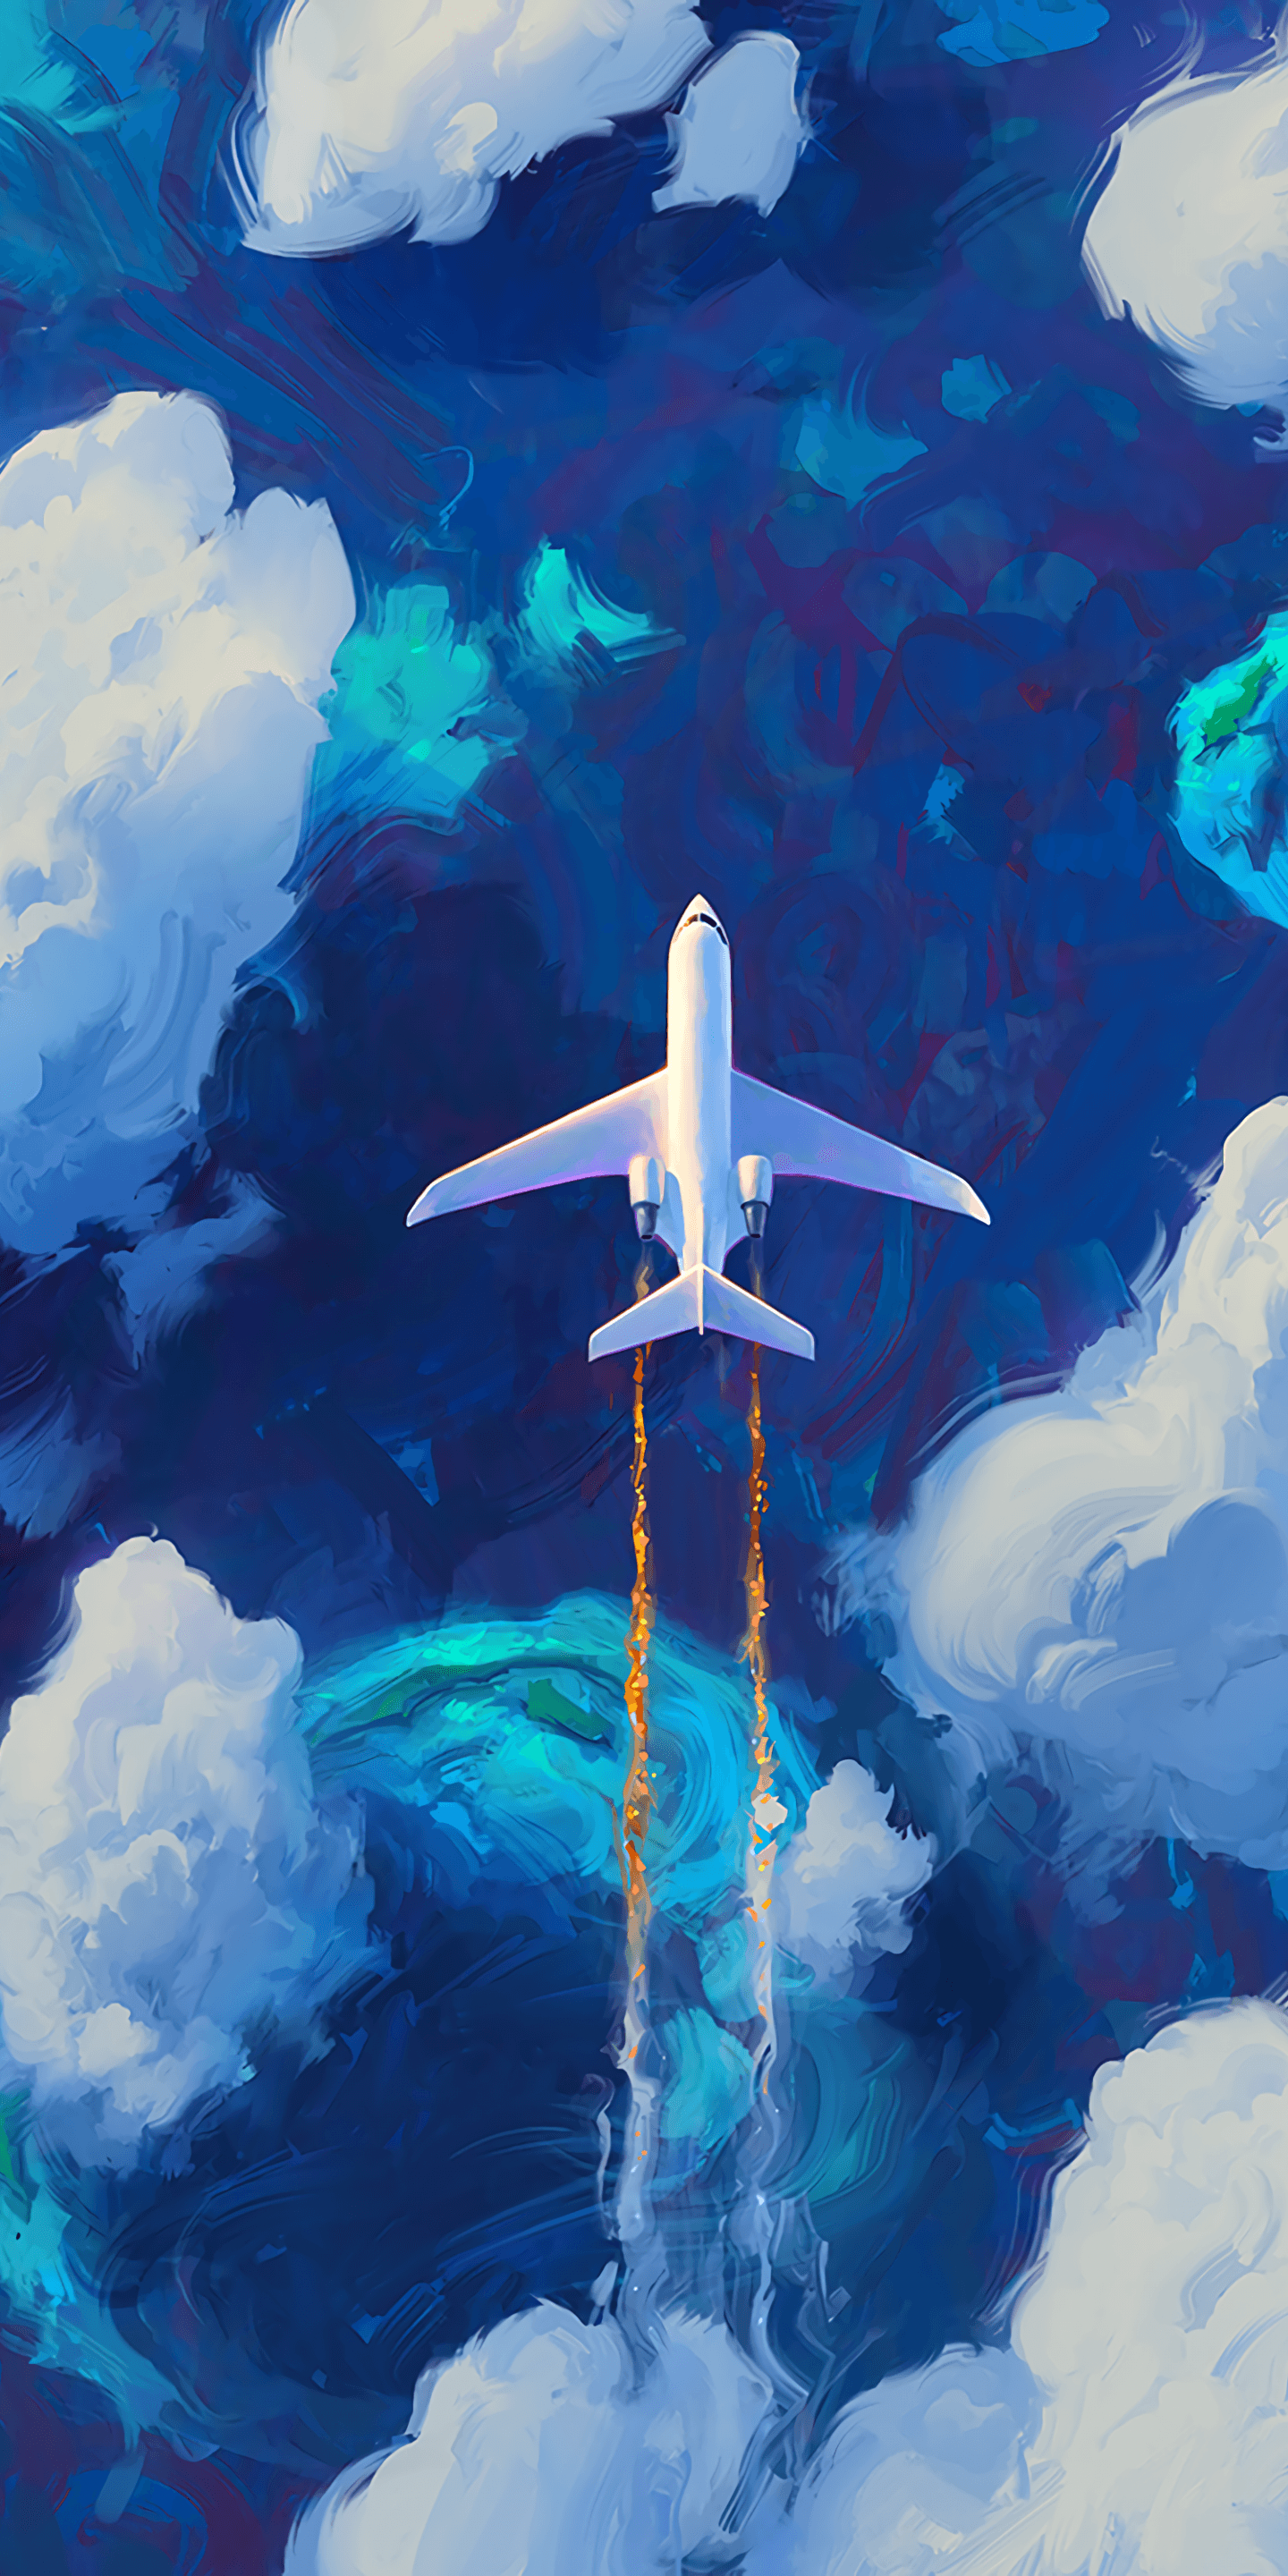 Aircraft, artwork, sky, clouds, 1440x2880 wallpaper. Anime in 2019